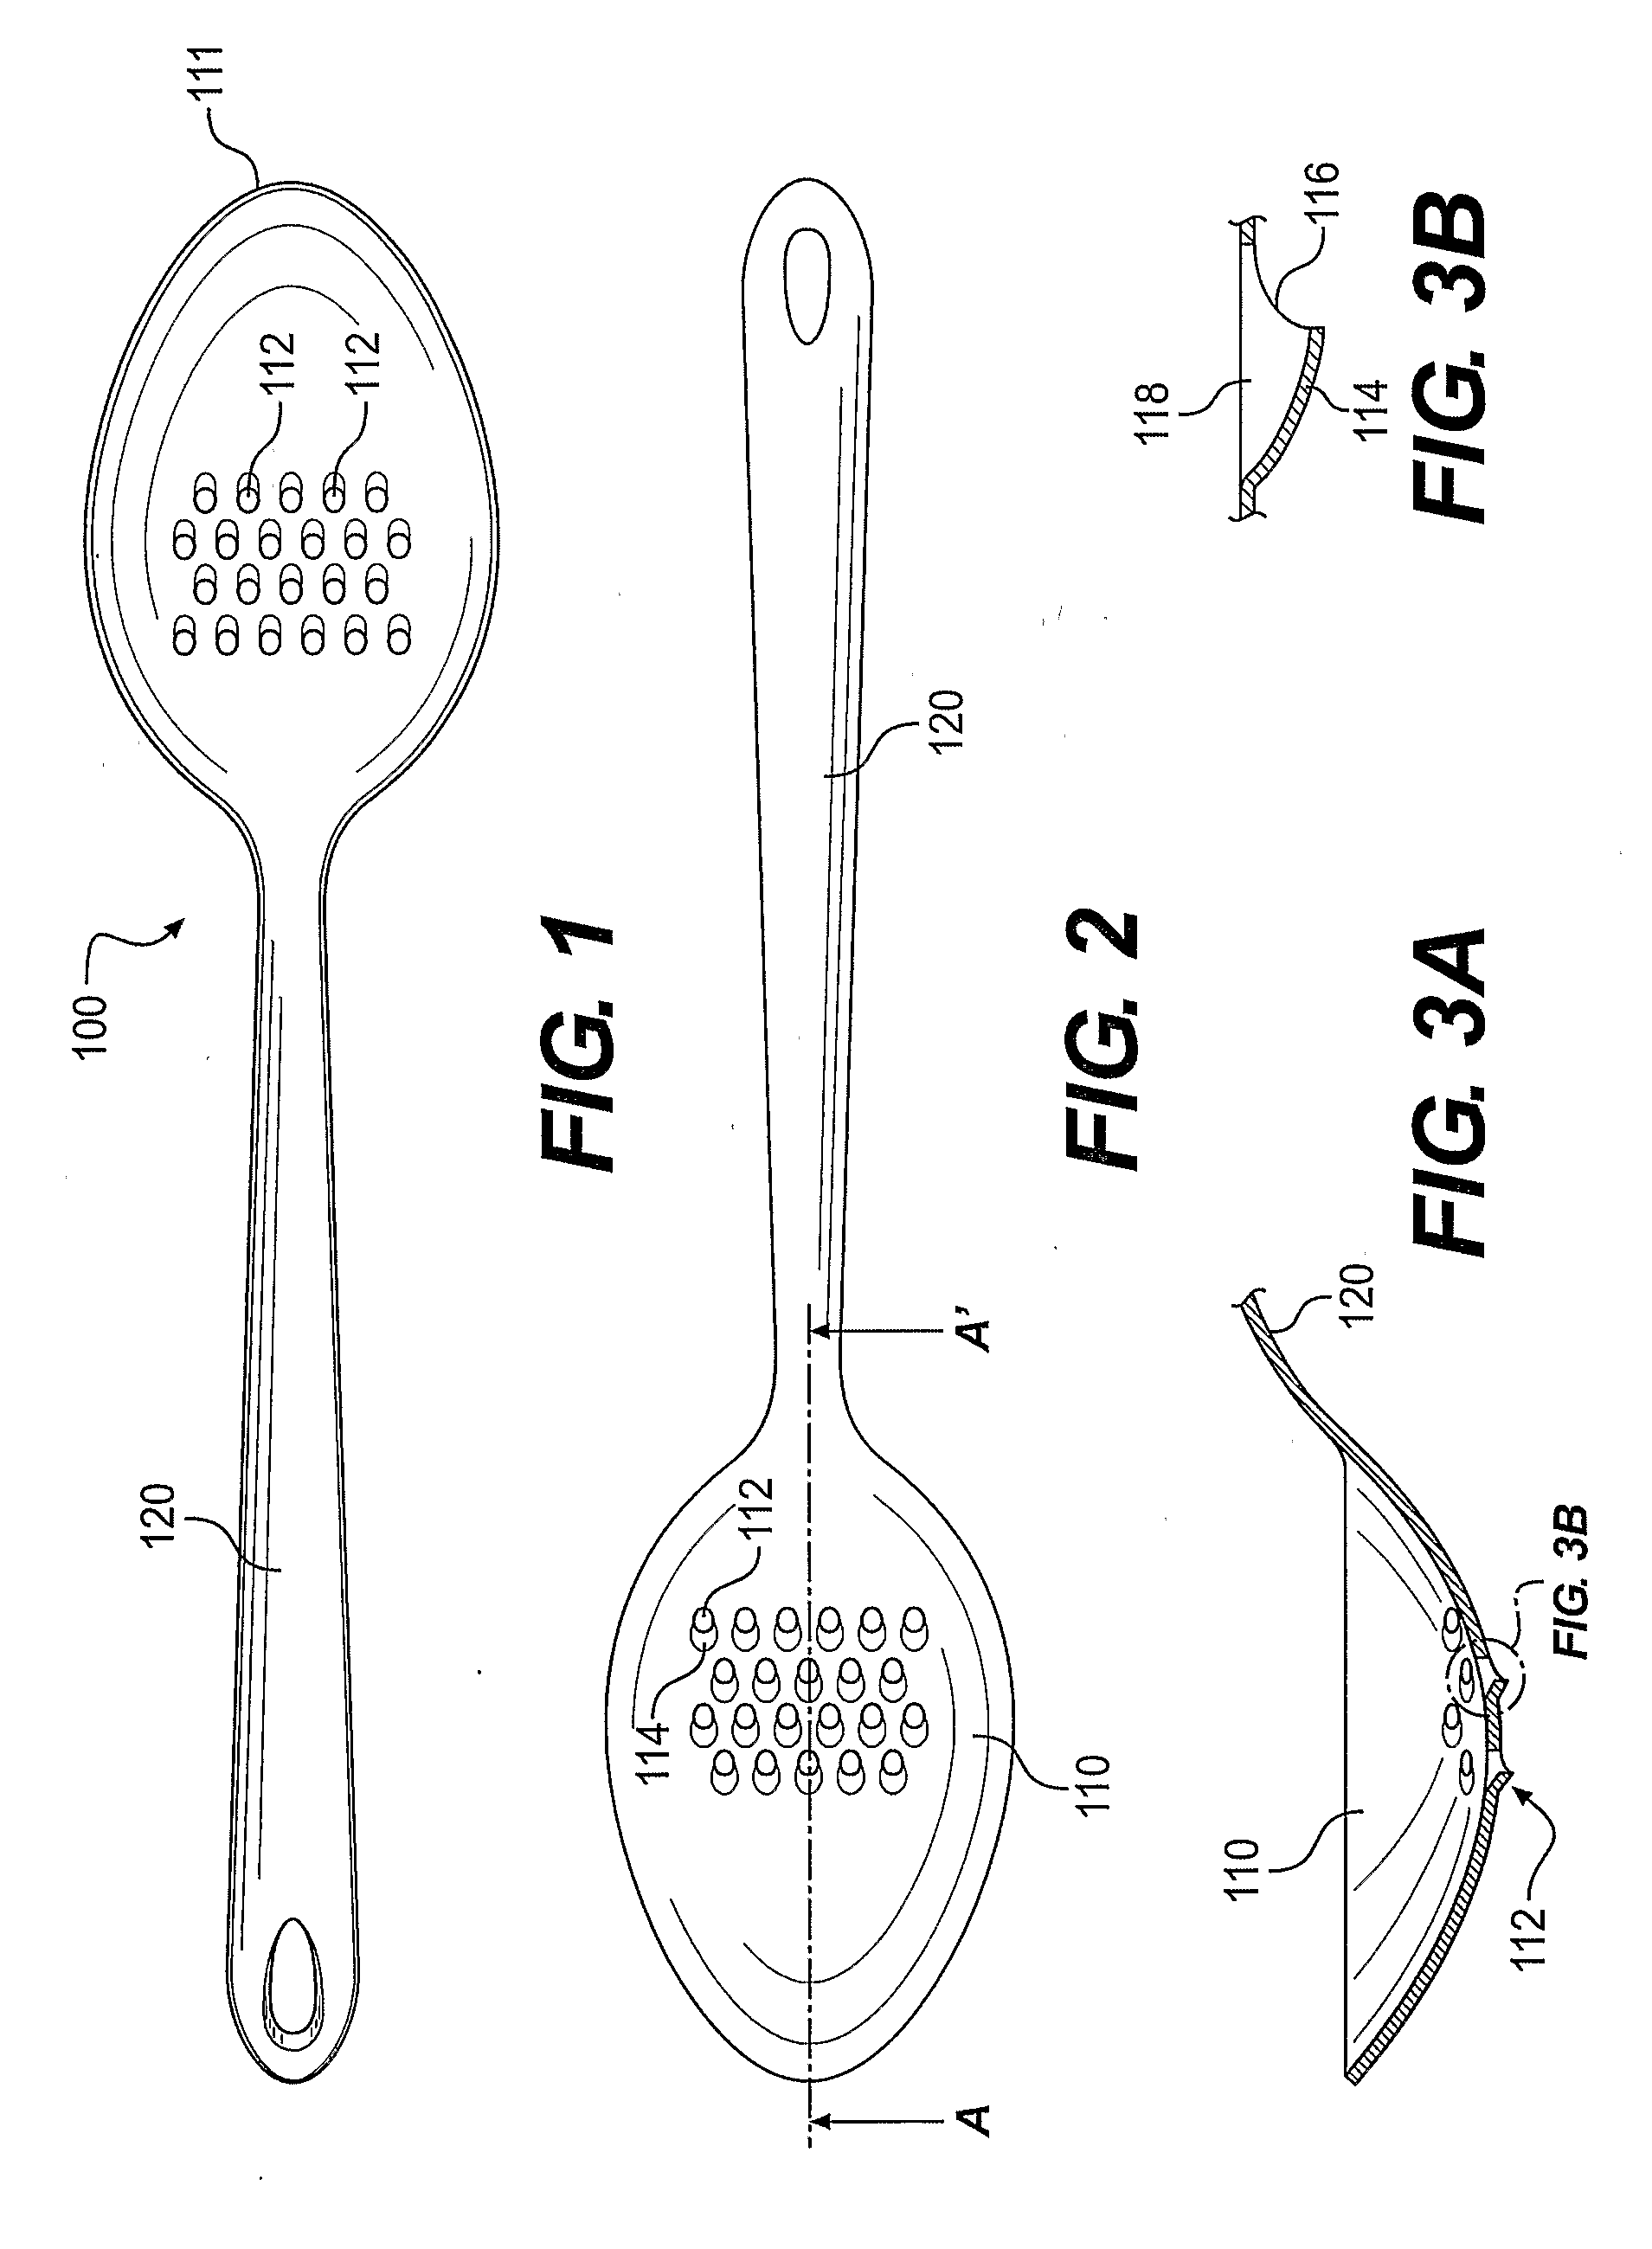 Spoon-shaped grating implement